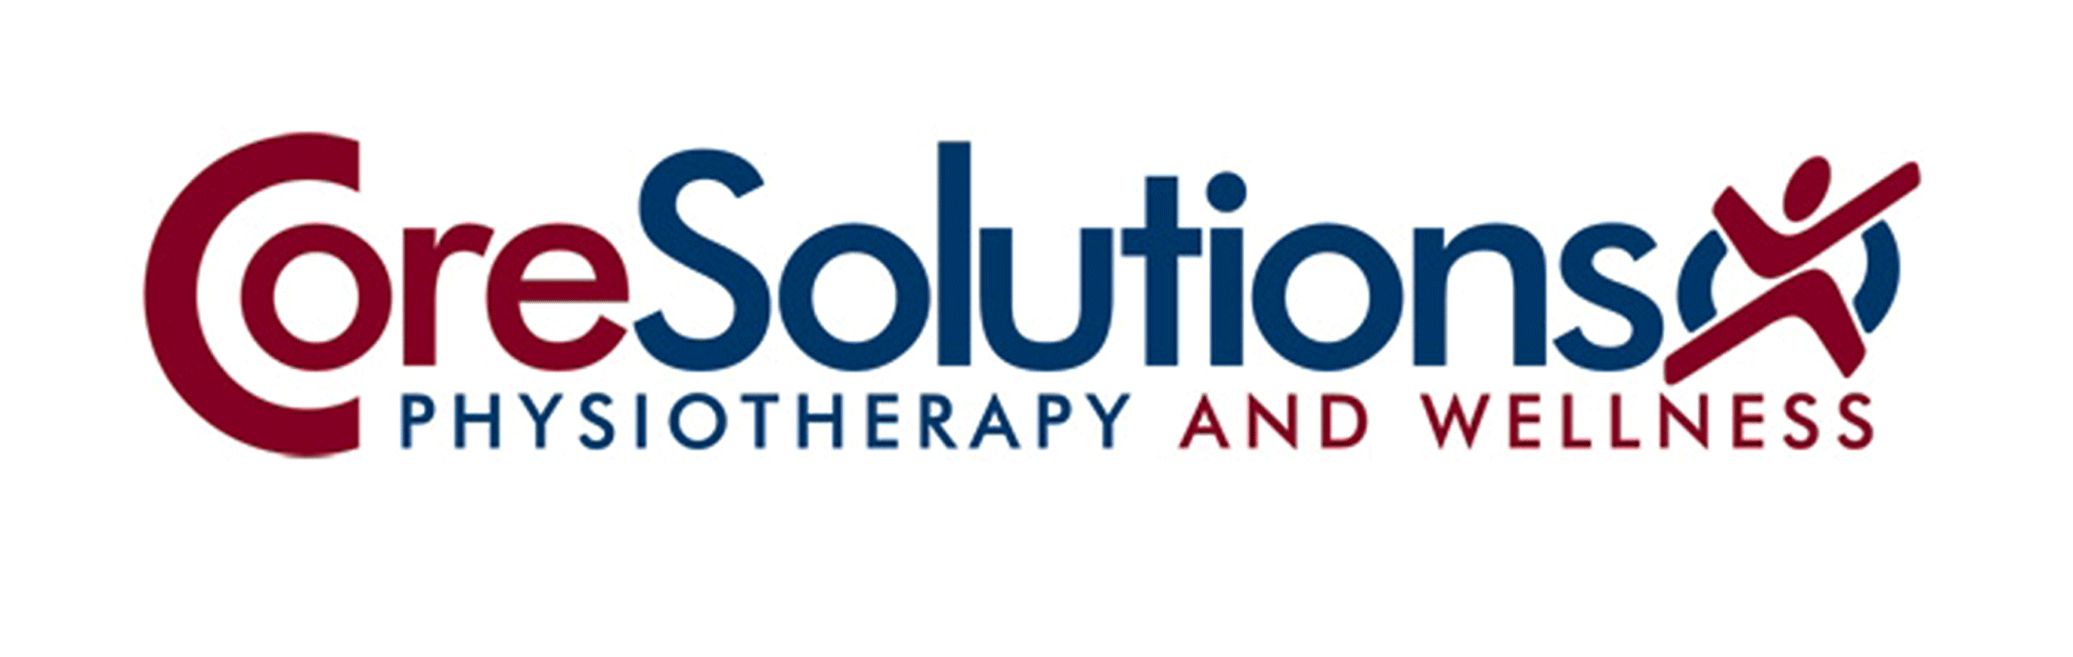 CoreSolutions Physiotherapy & Wellness